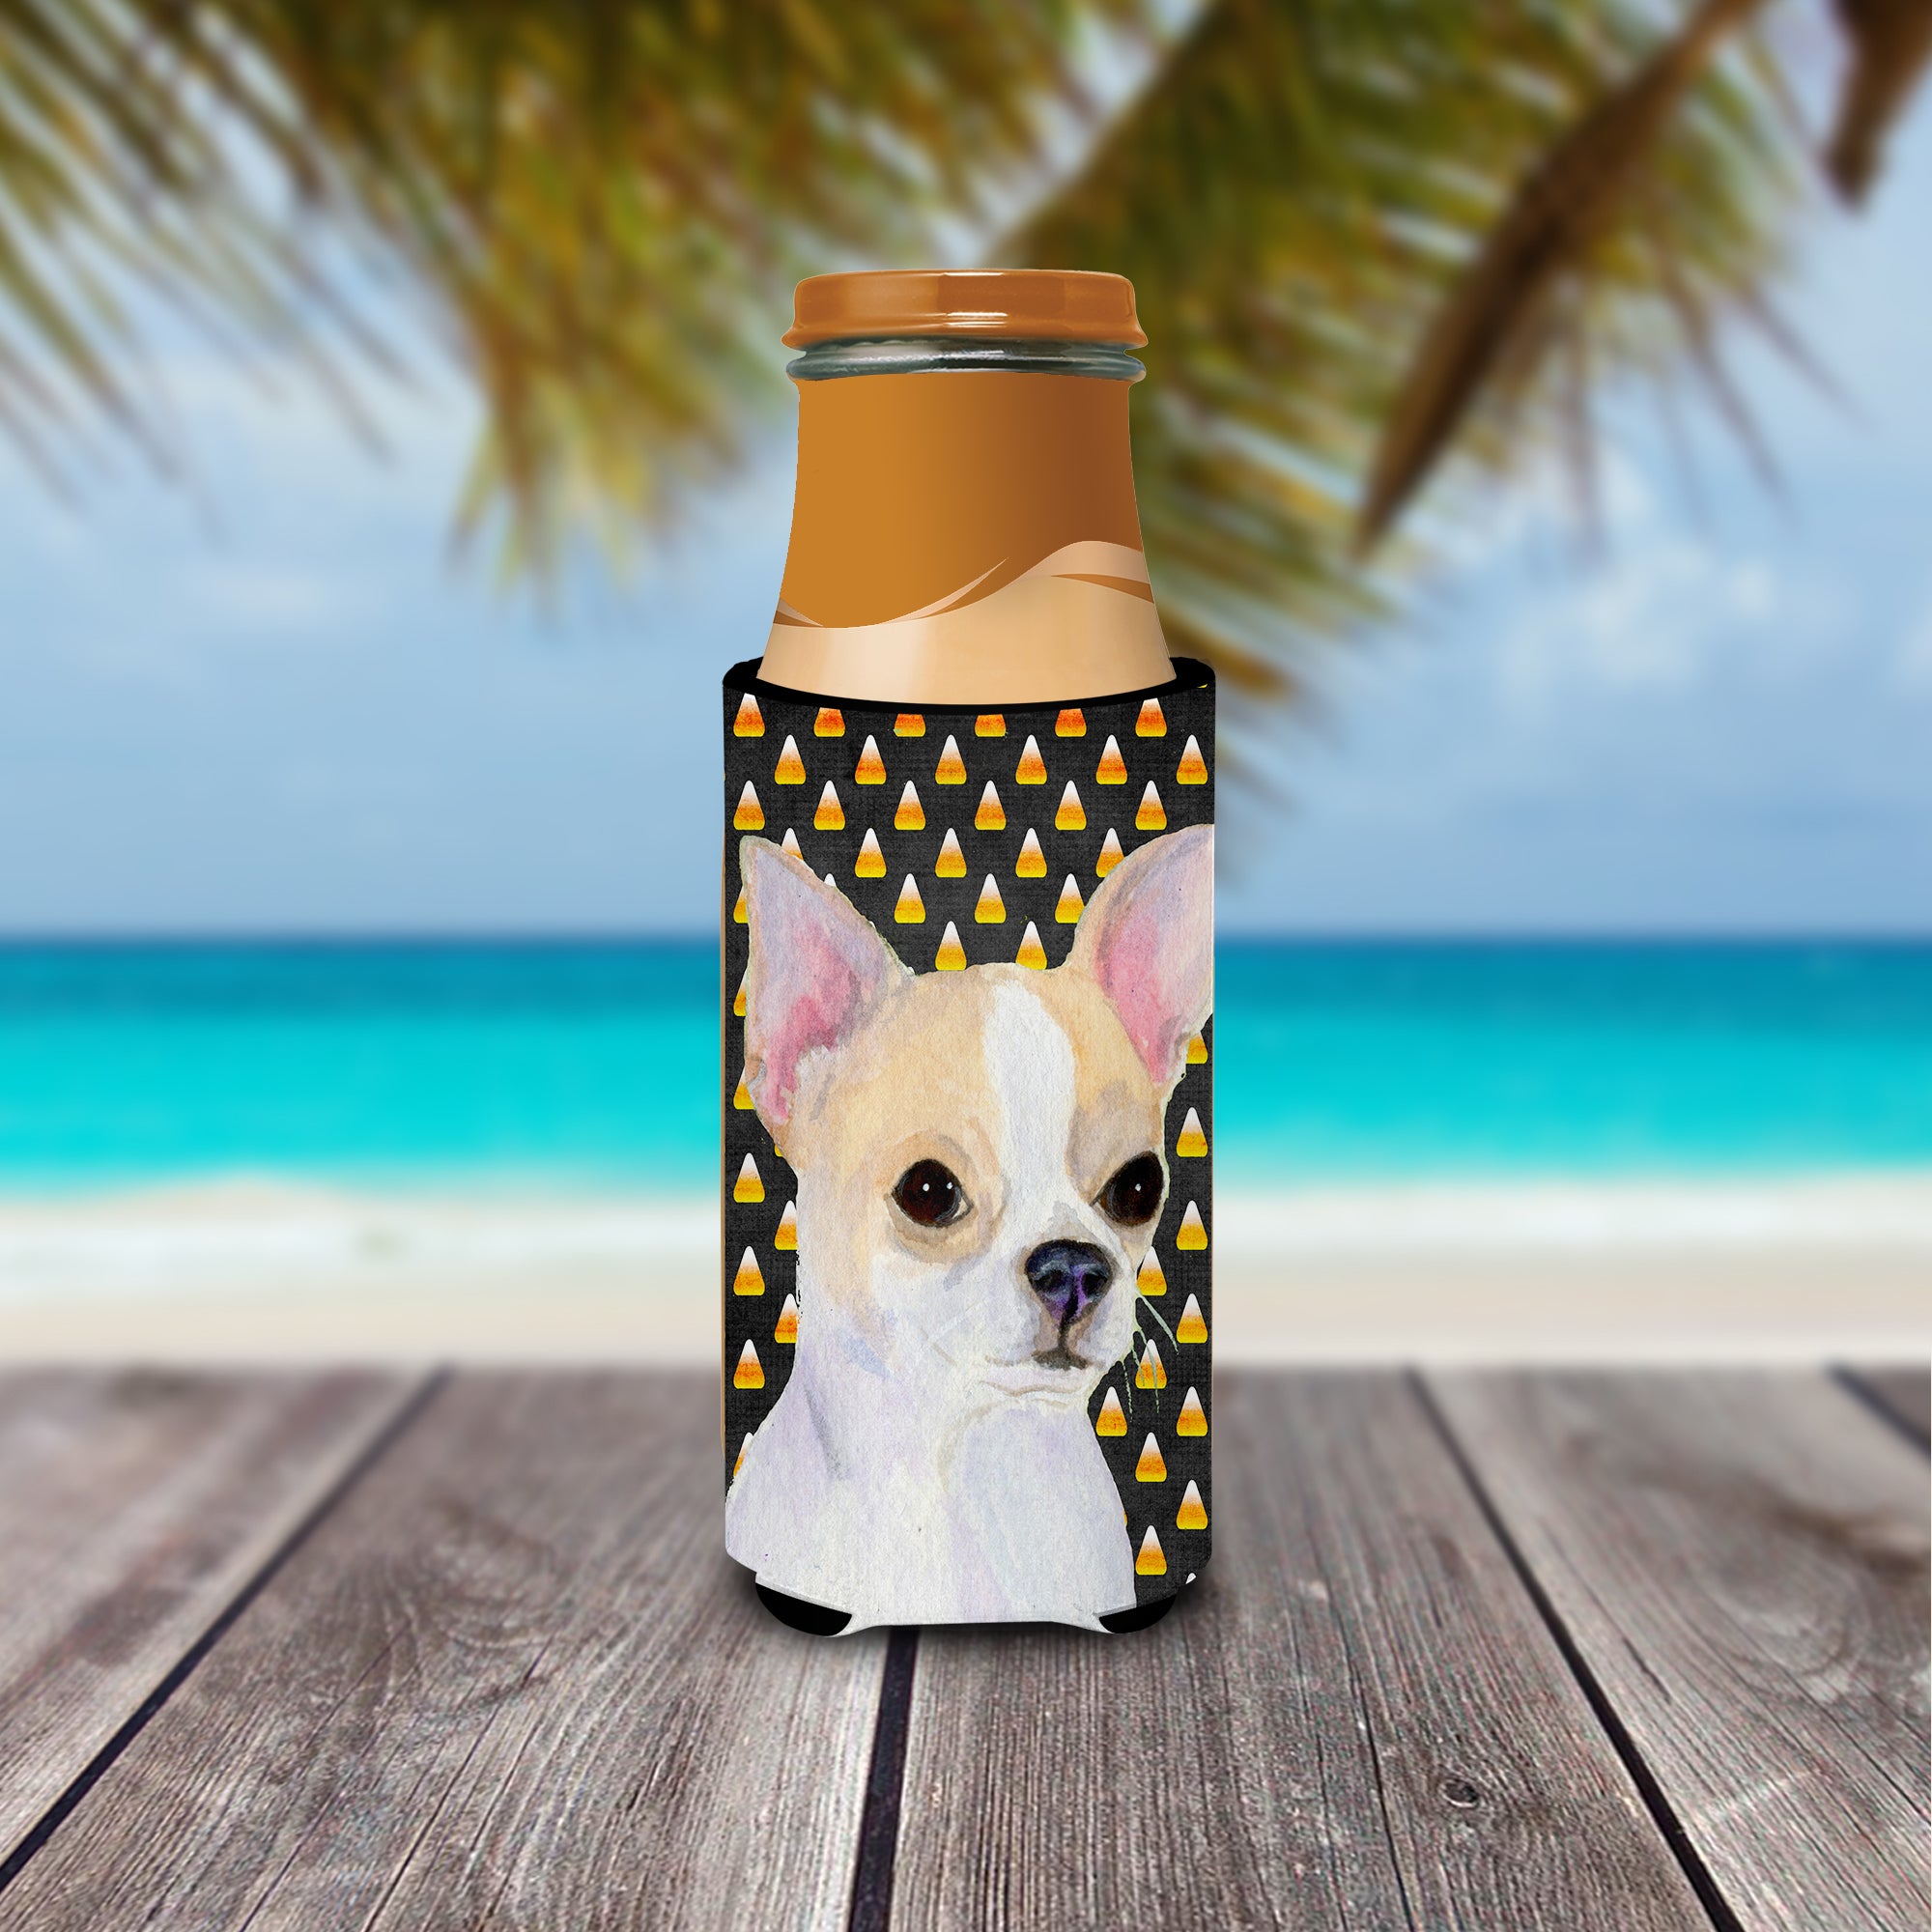 Chihuahua Candy Corn Halloween Portrait Ultra Beverage Insulators for slim cans SS4267MUK.